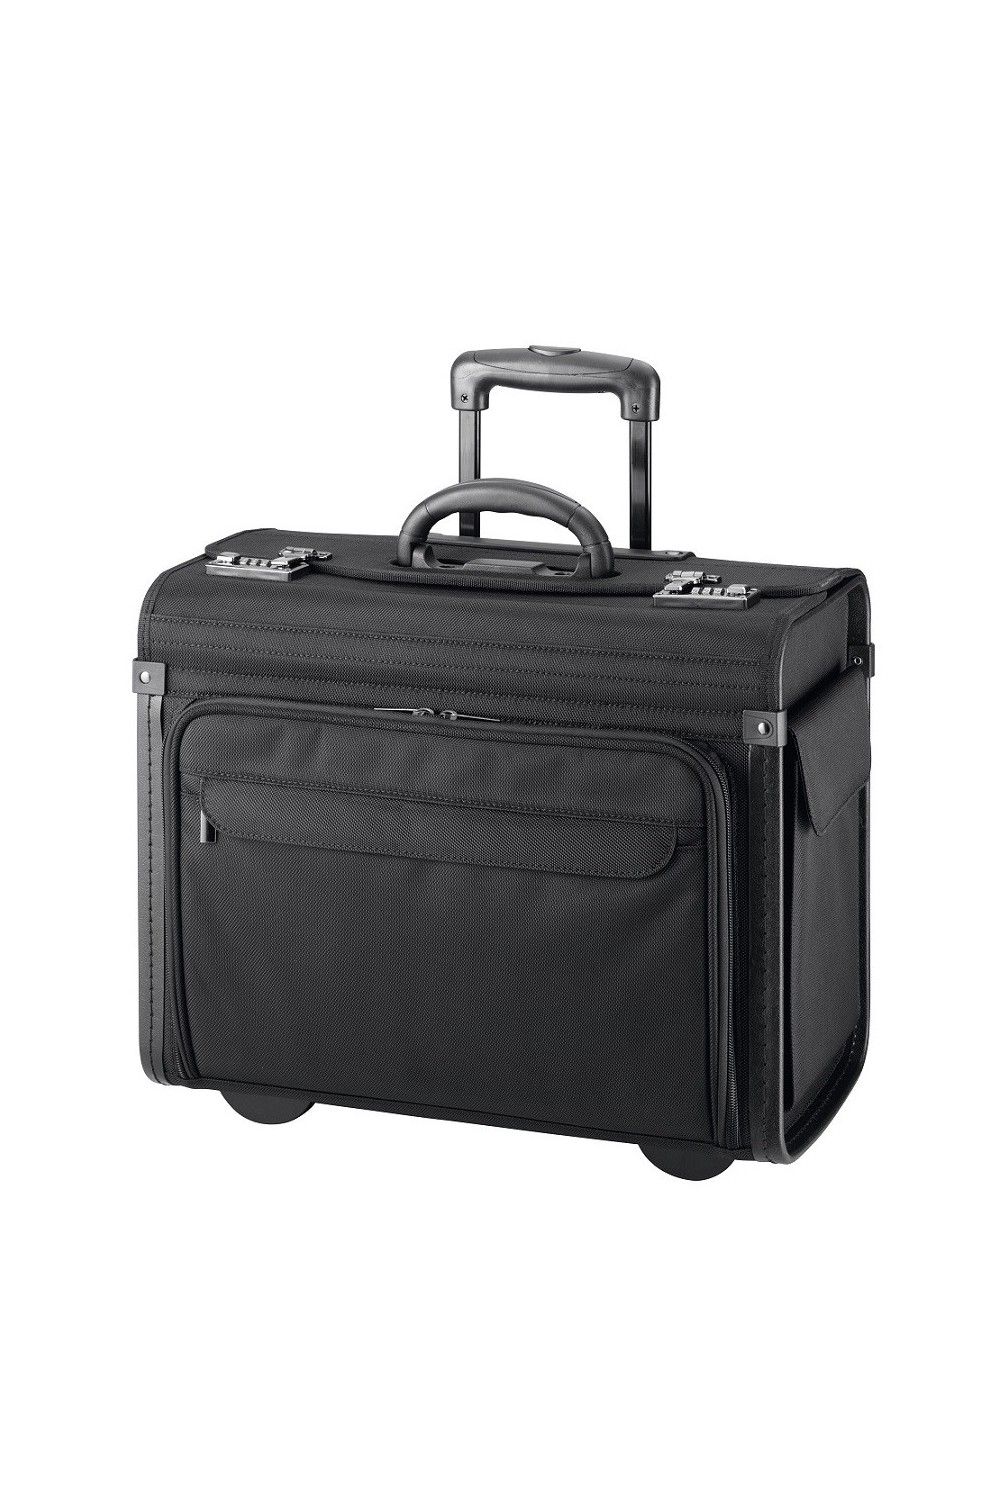 D & N pilote valise trolley polyester 2 roues 2871